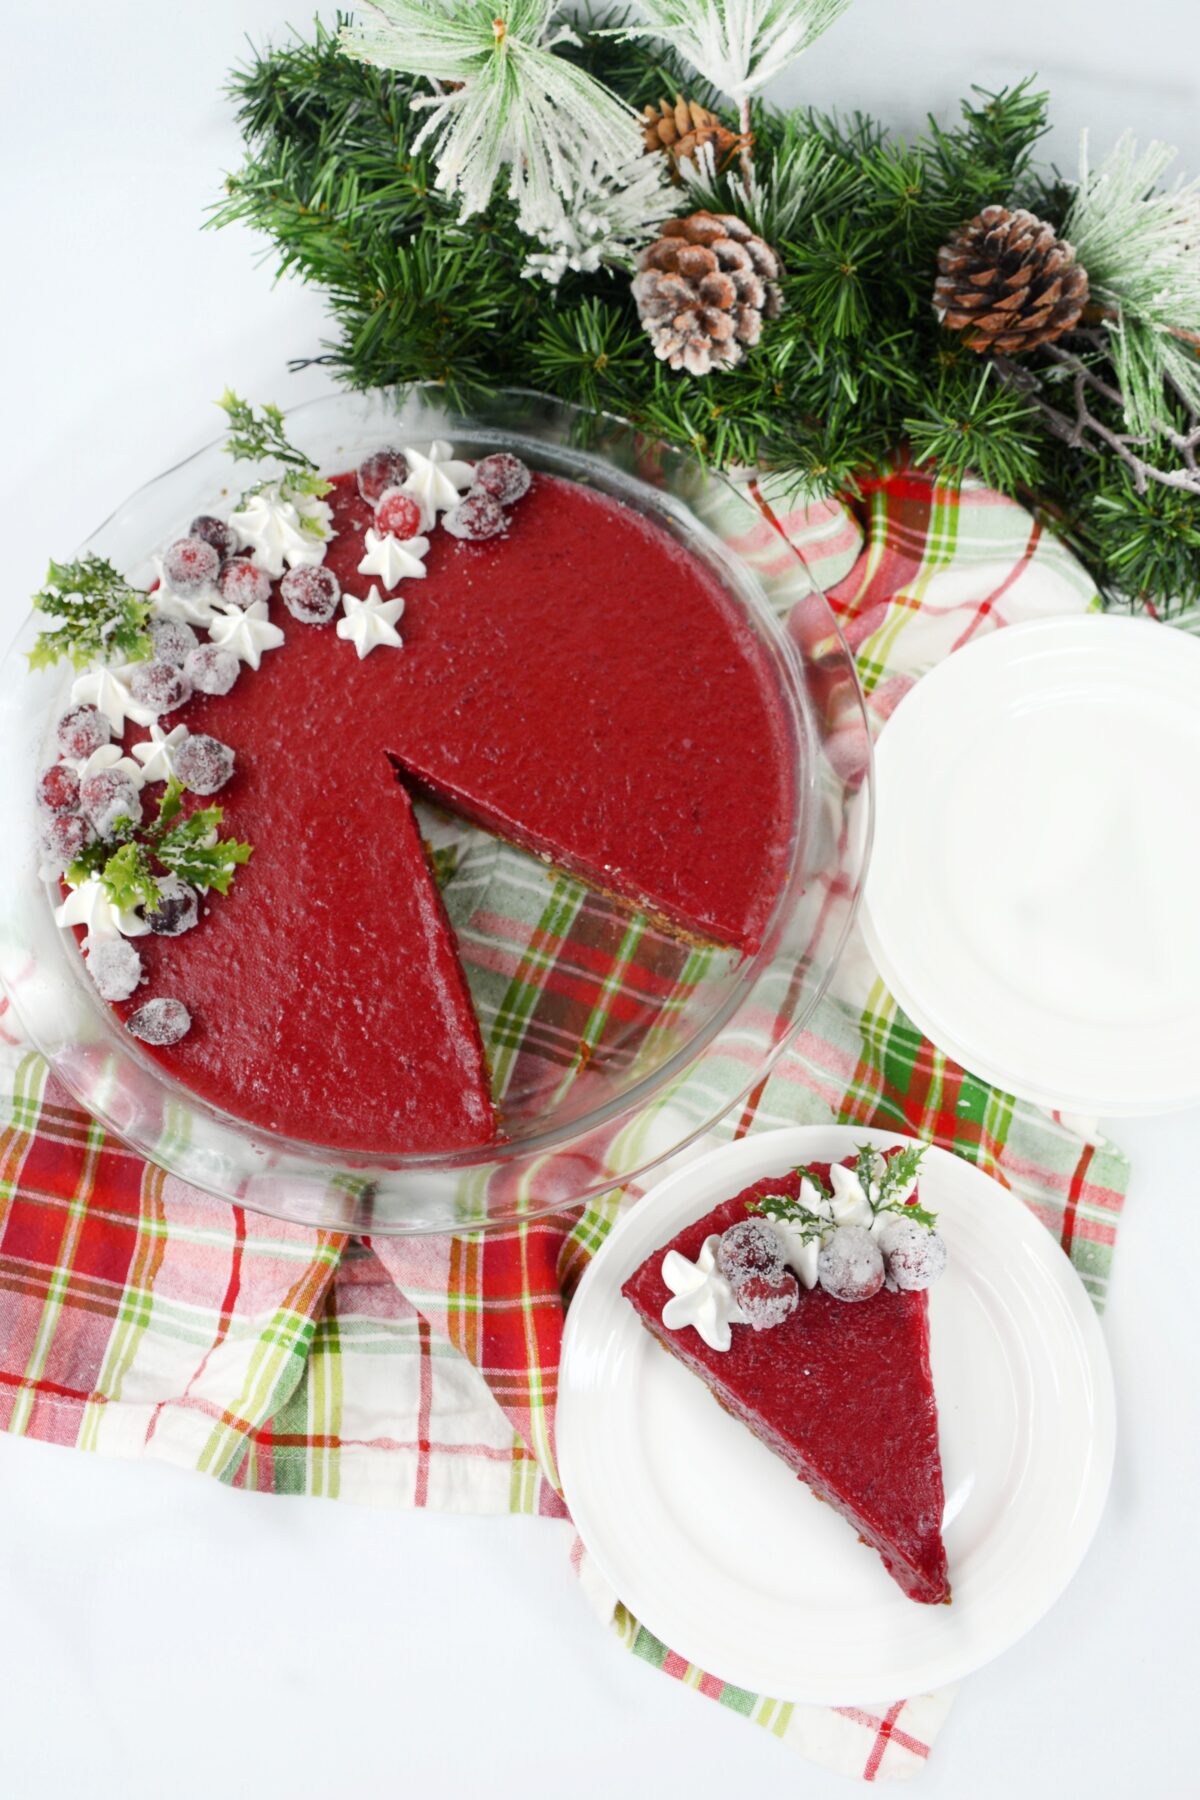 Looking for a last minute dish to bring to a Christmas party? Try this easy and delicious cranberry curd tart recipe. It's sure to be a hit!